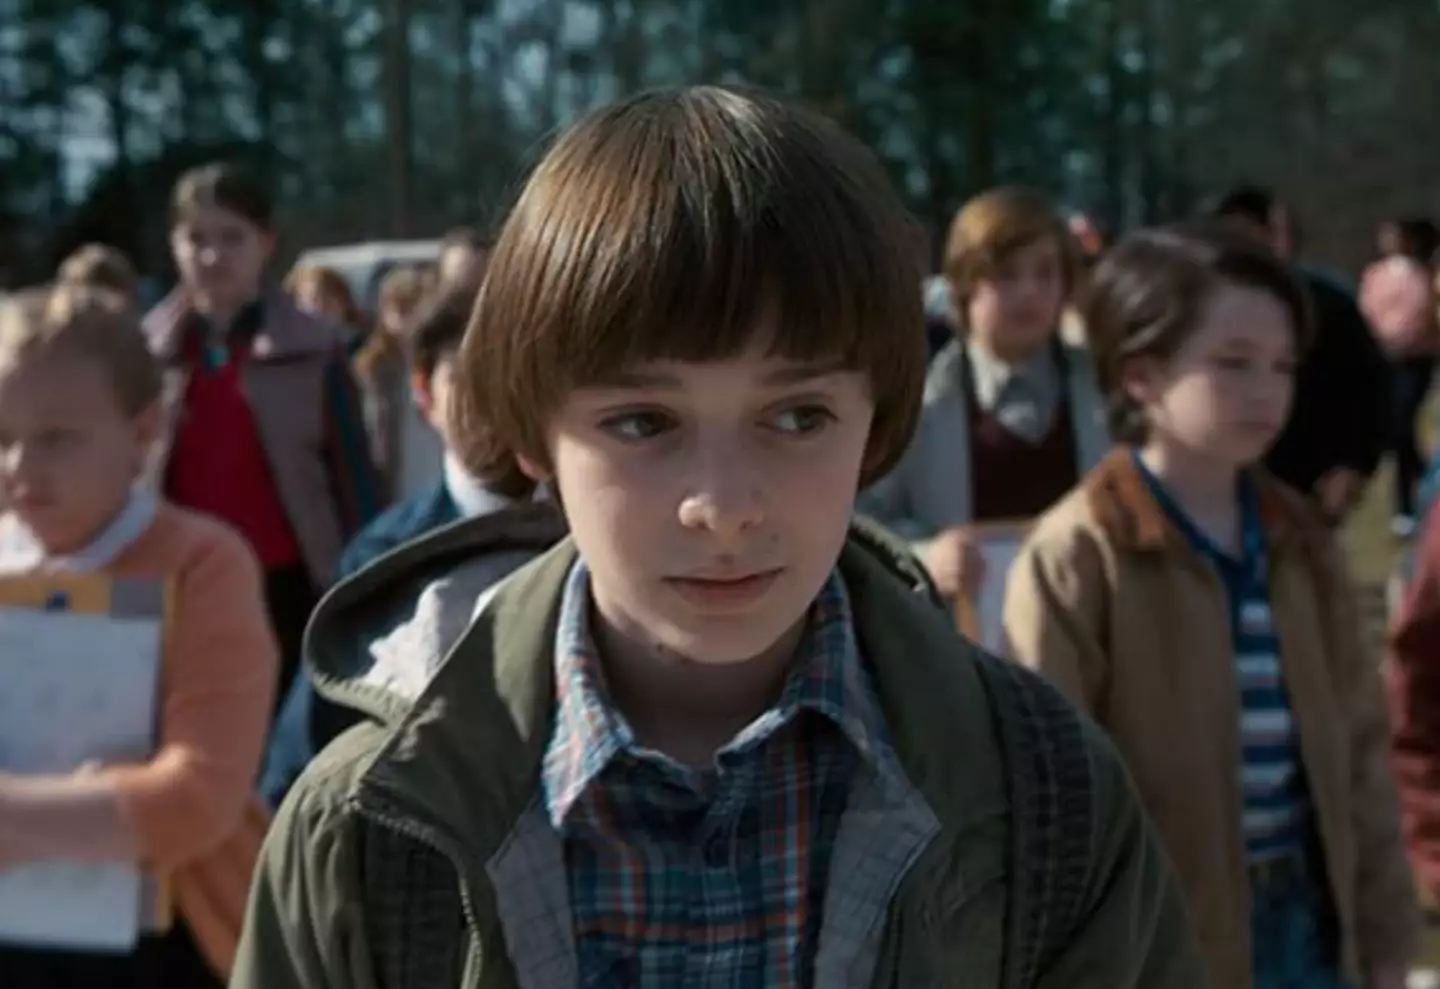 Noah Schnapp was 12 years old when he first appeared in the role of Will Byers.